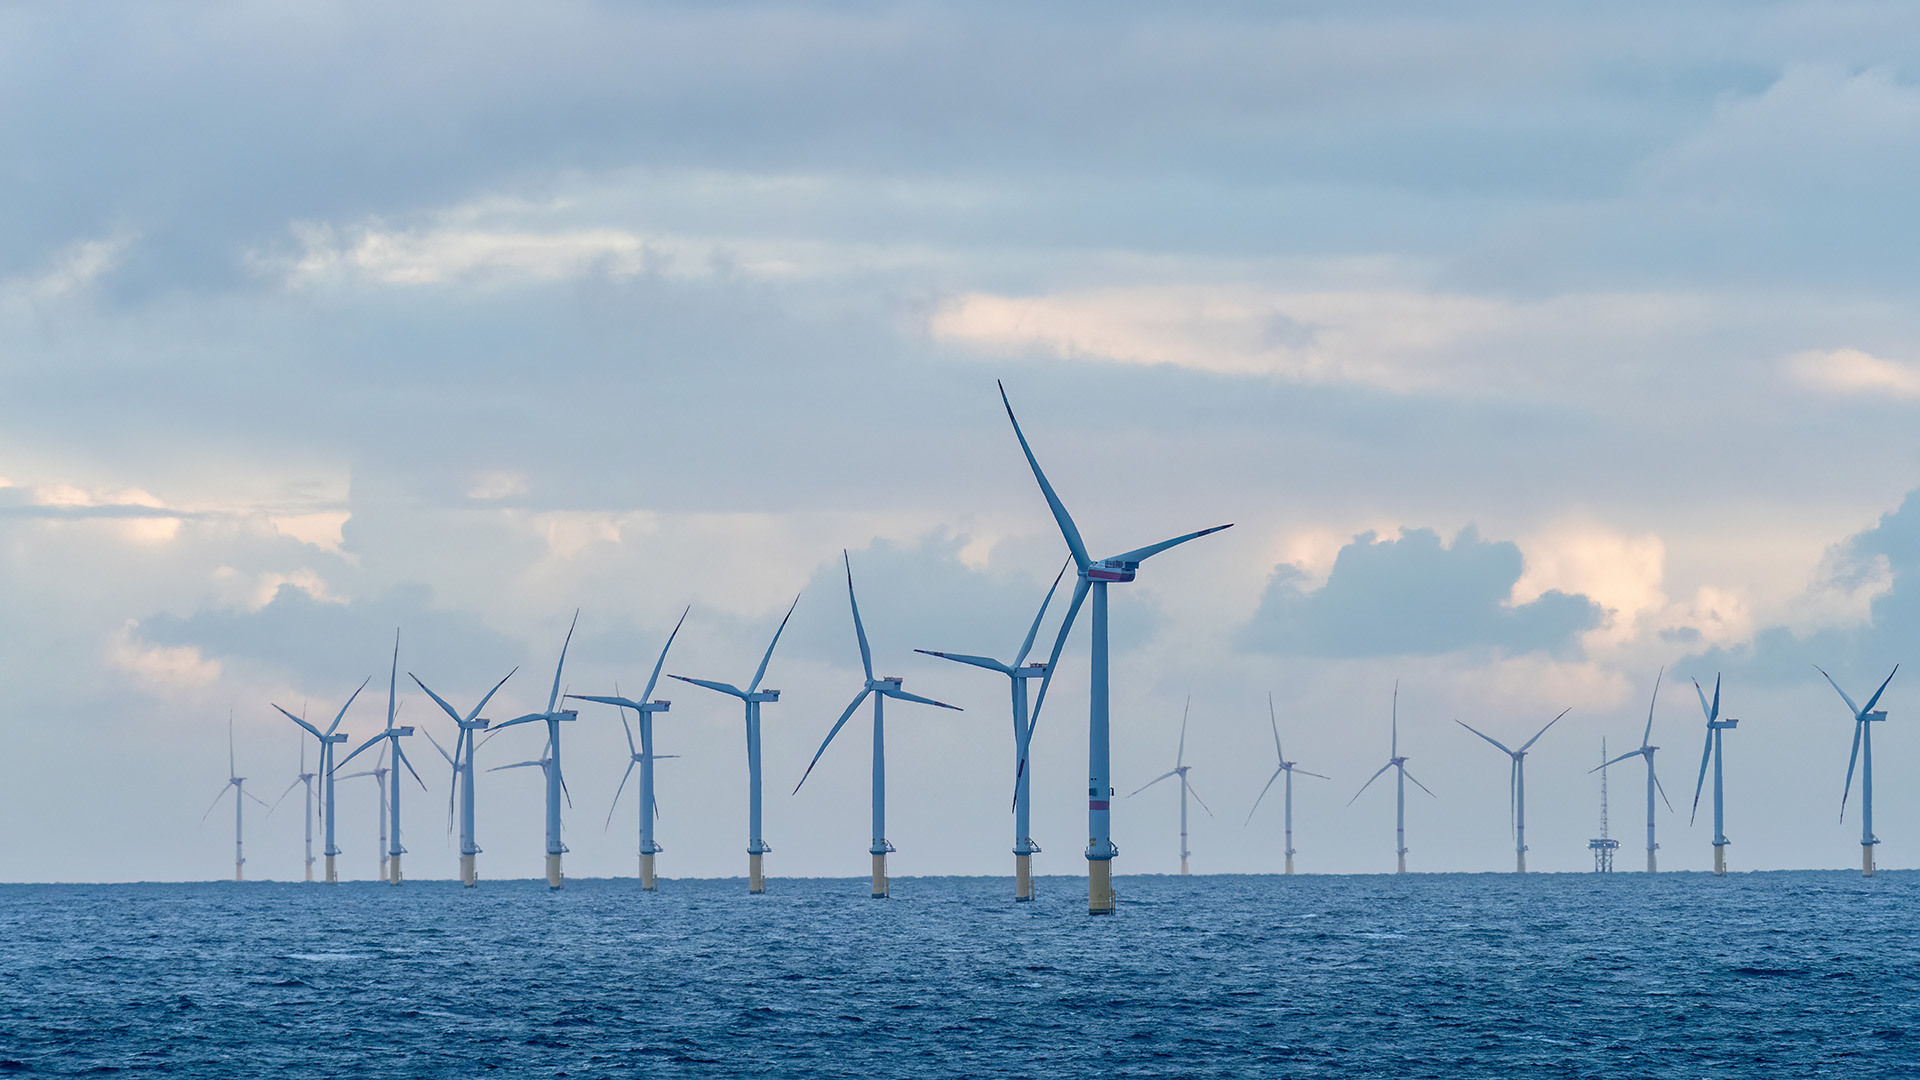 Guidance on community engagement for the Australian offshore wind industry